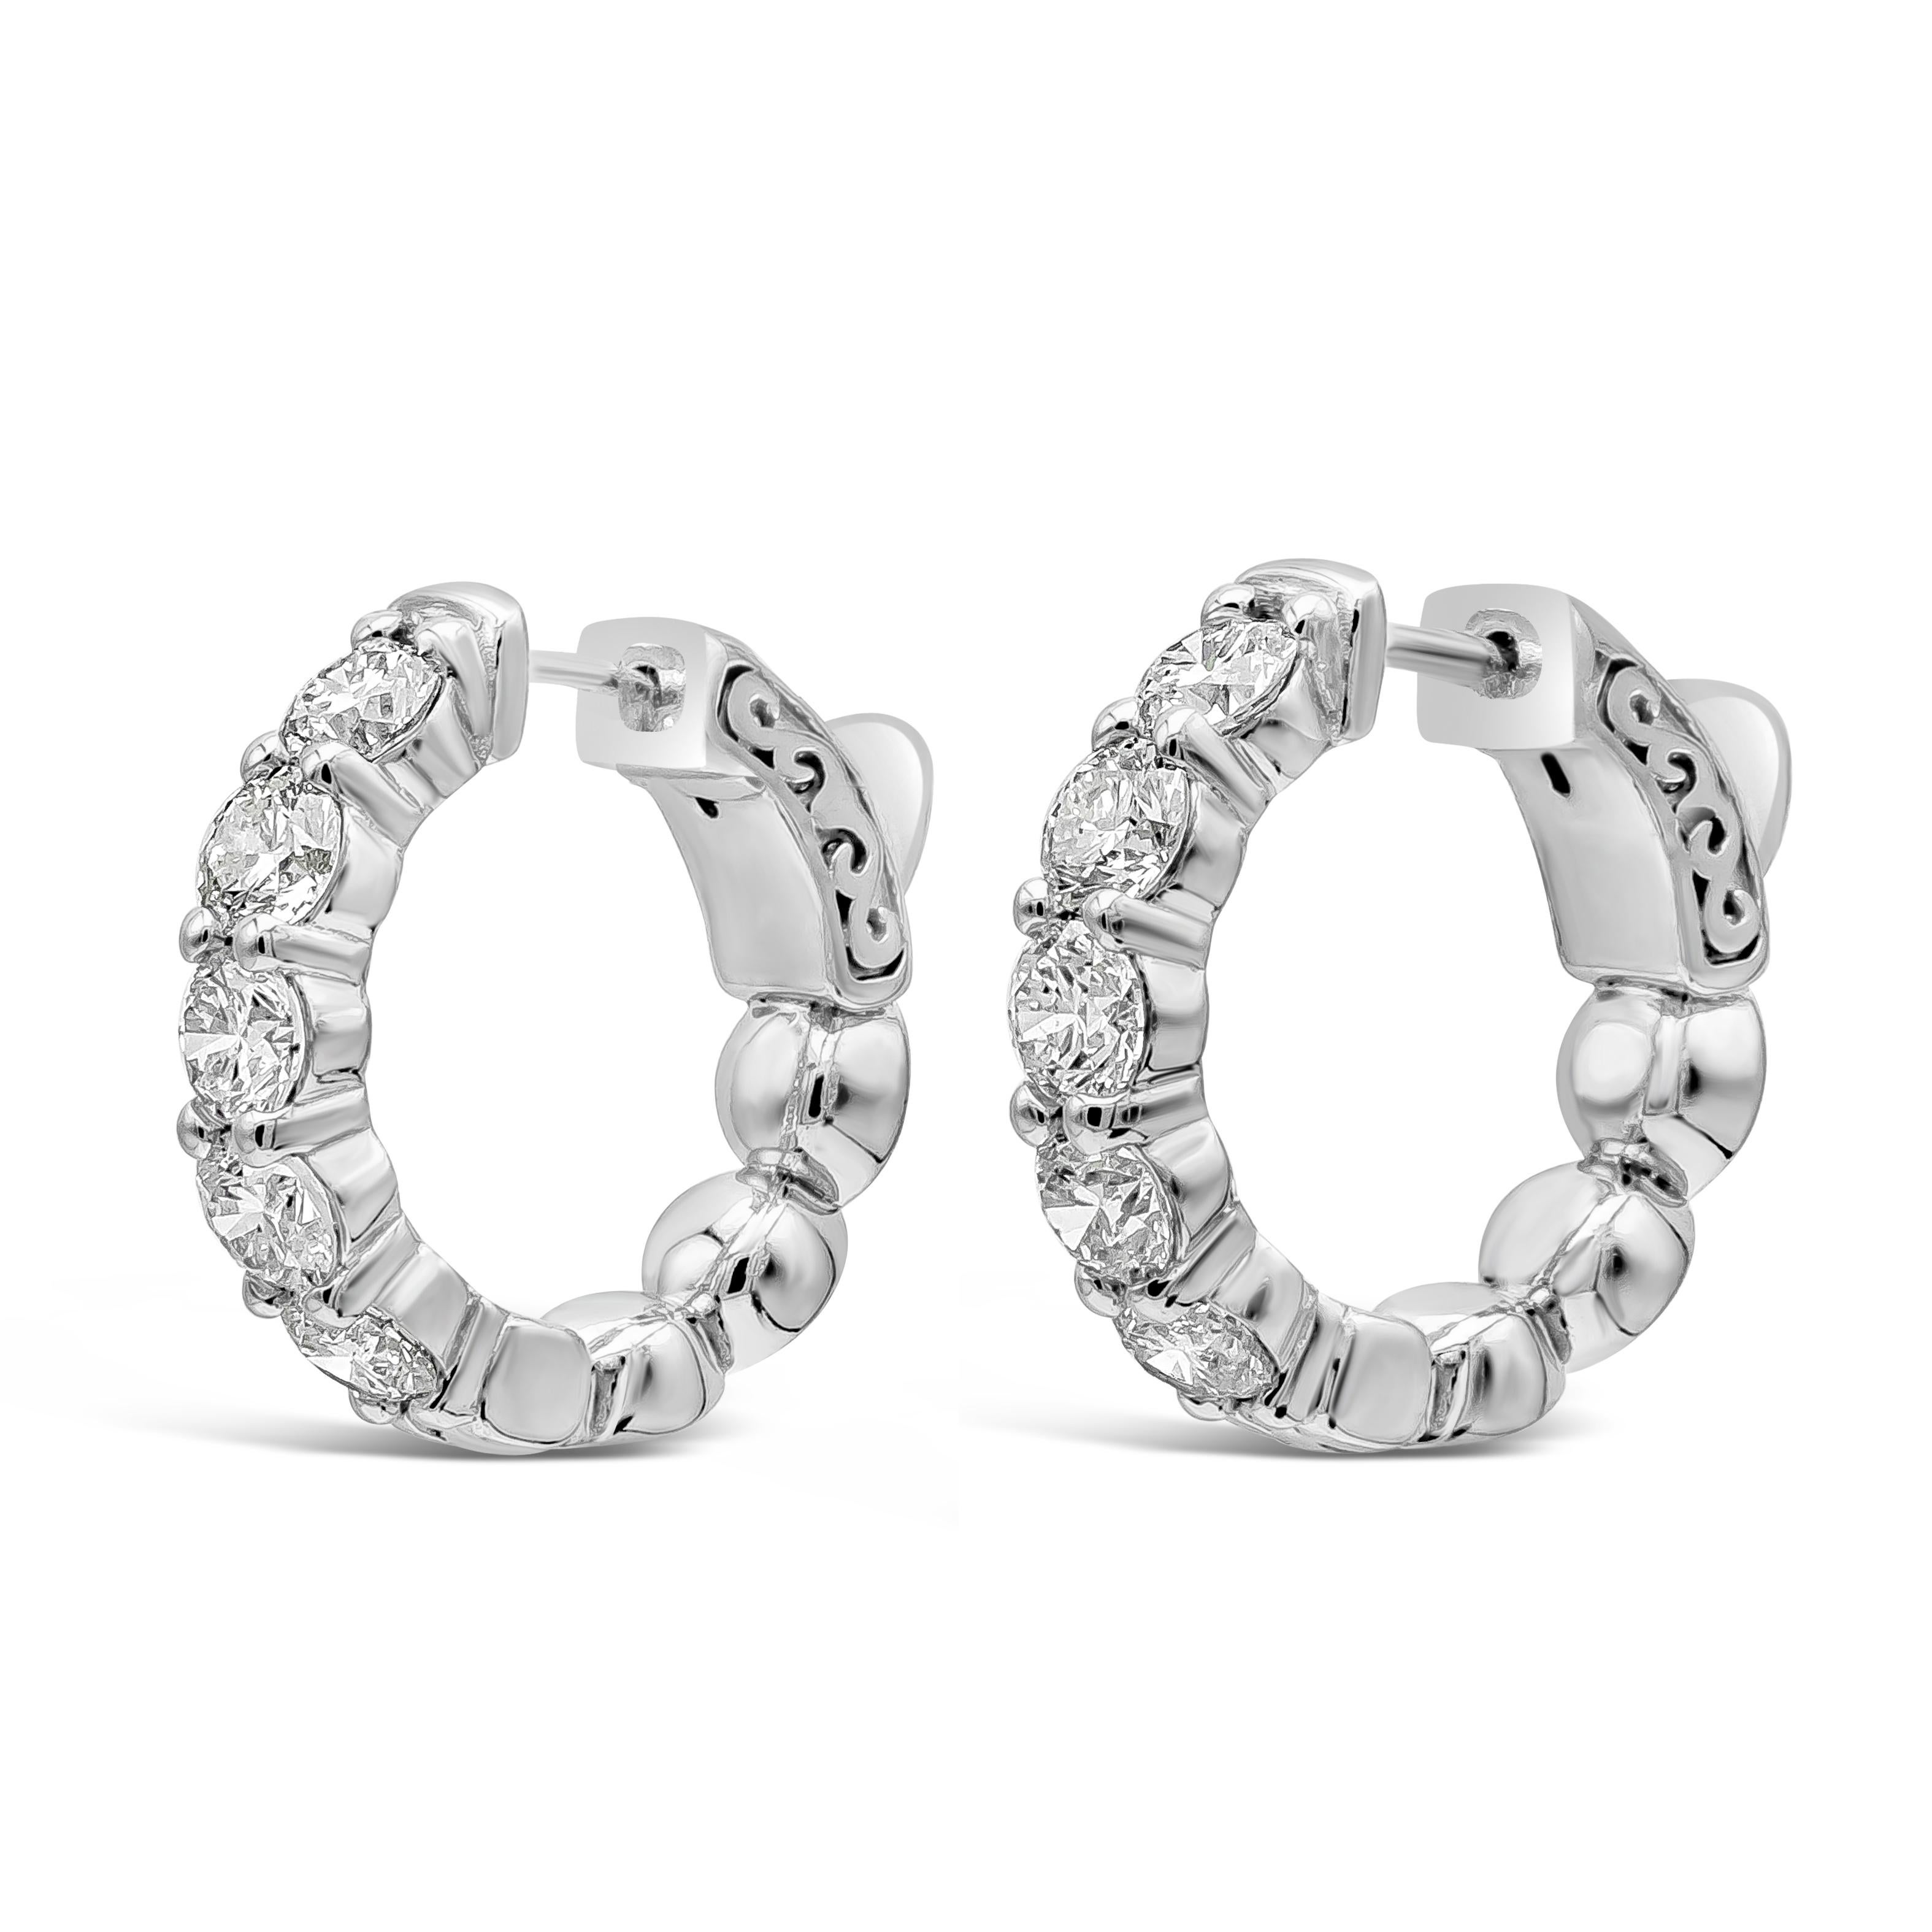 A classic and versatile style hoop earrings showcasing round brilliant diamonds weighing 2.30 carats total, G-H Color and VS-SI in Clarity. Set in a shared prong setting and finely made in 14k white gold. 0.75 inch diameter.

Roman Malakov is a